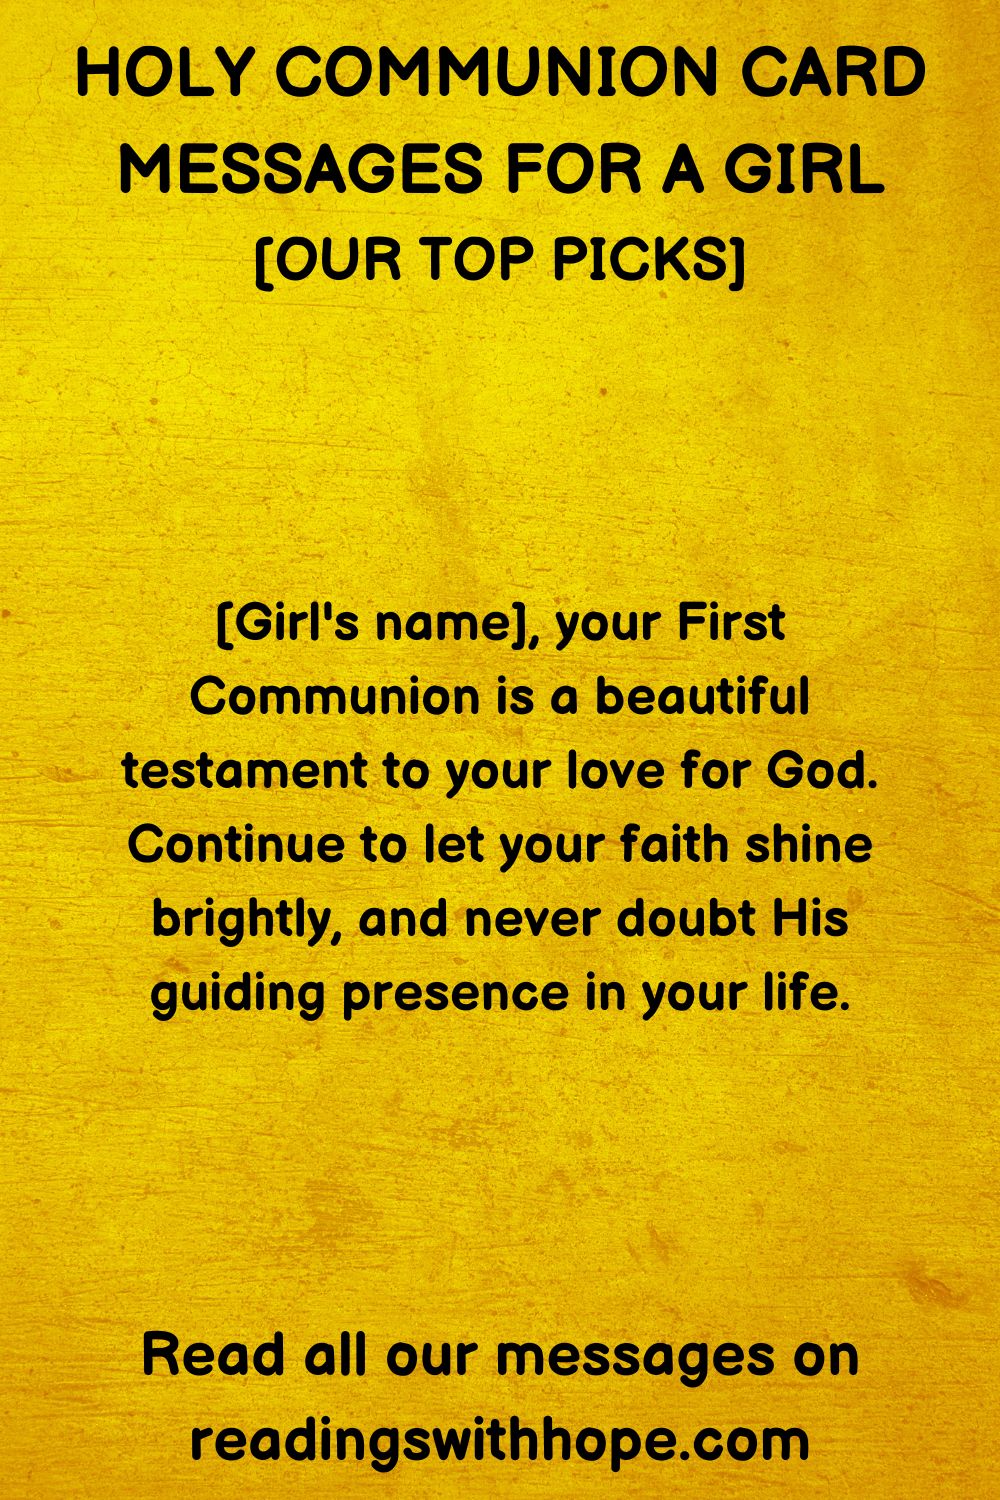 Holy Communion Card Messages for a Girl